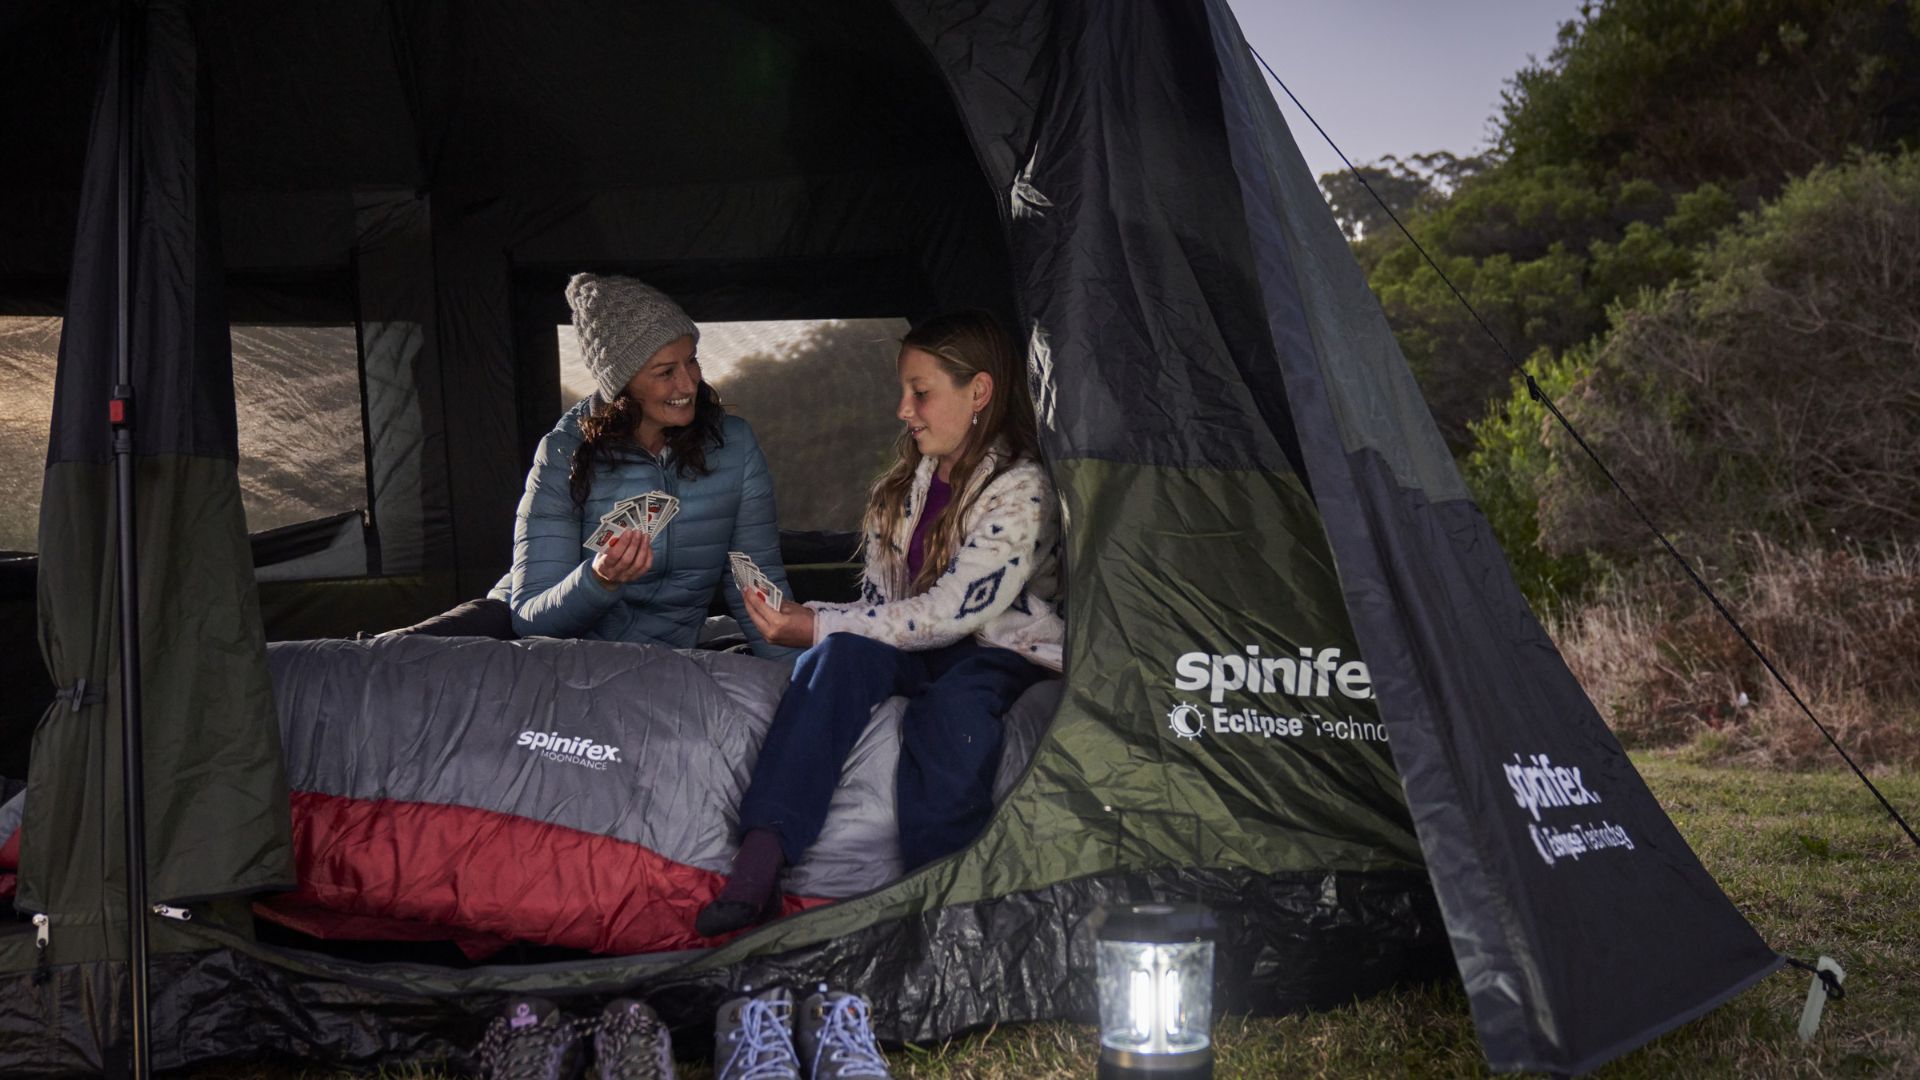 Spinifex Moondance 0° Queen Sleeping Bag in a Spinifex Mawson Eclipse™ 8 Person Tent